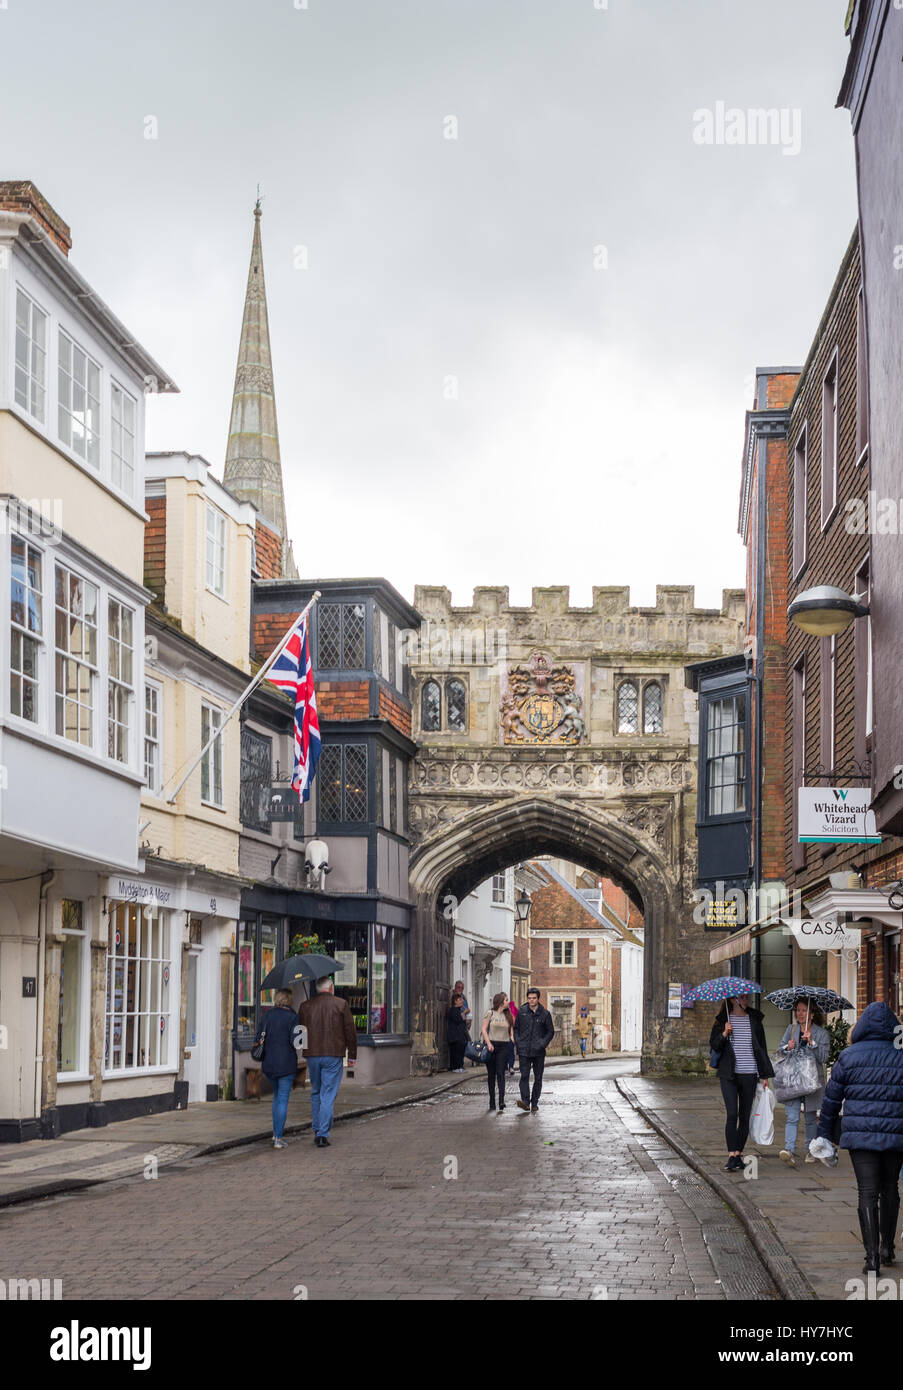 High Street Gate, Salisbury, Wiltshire, UK. Mixed weather in the historic cathedral city with heavy April rain showers and sunshine on a spring afternoon. Stock Photo